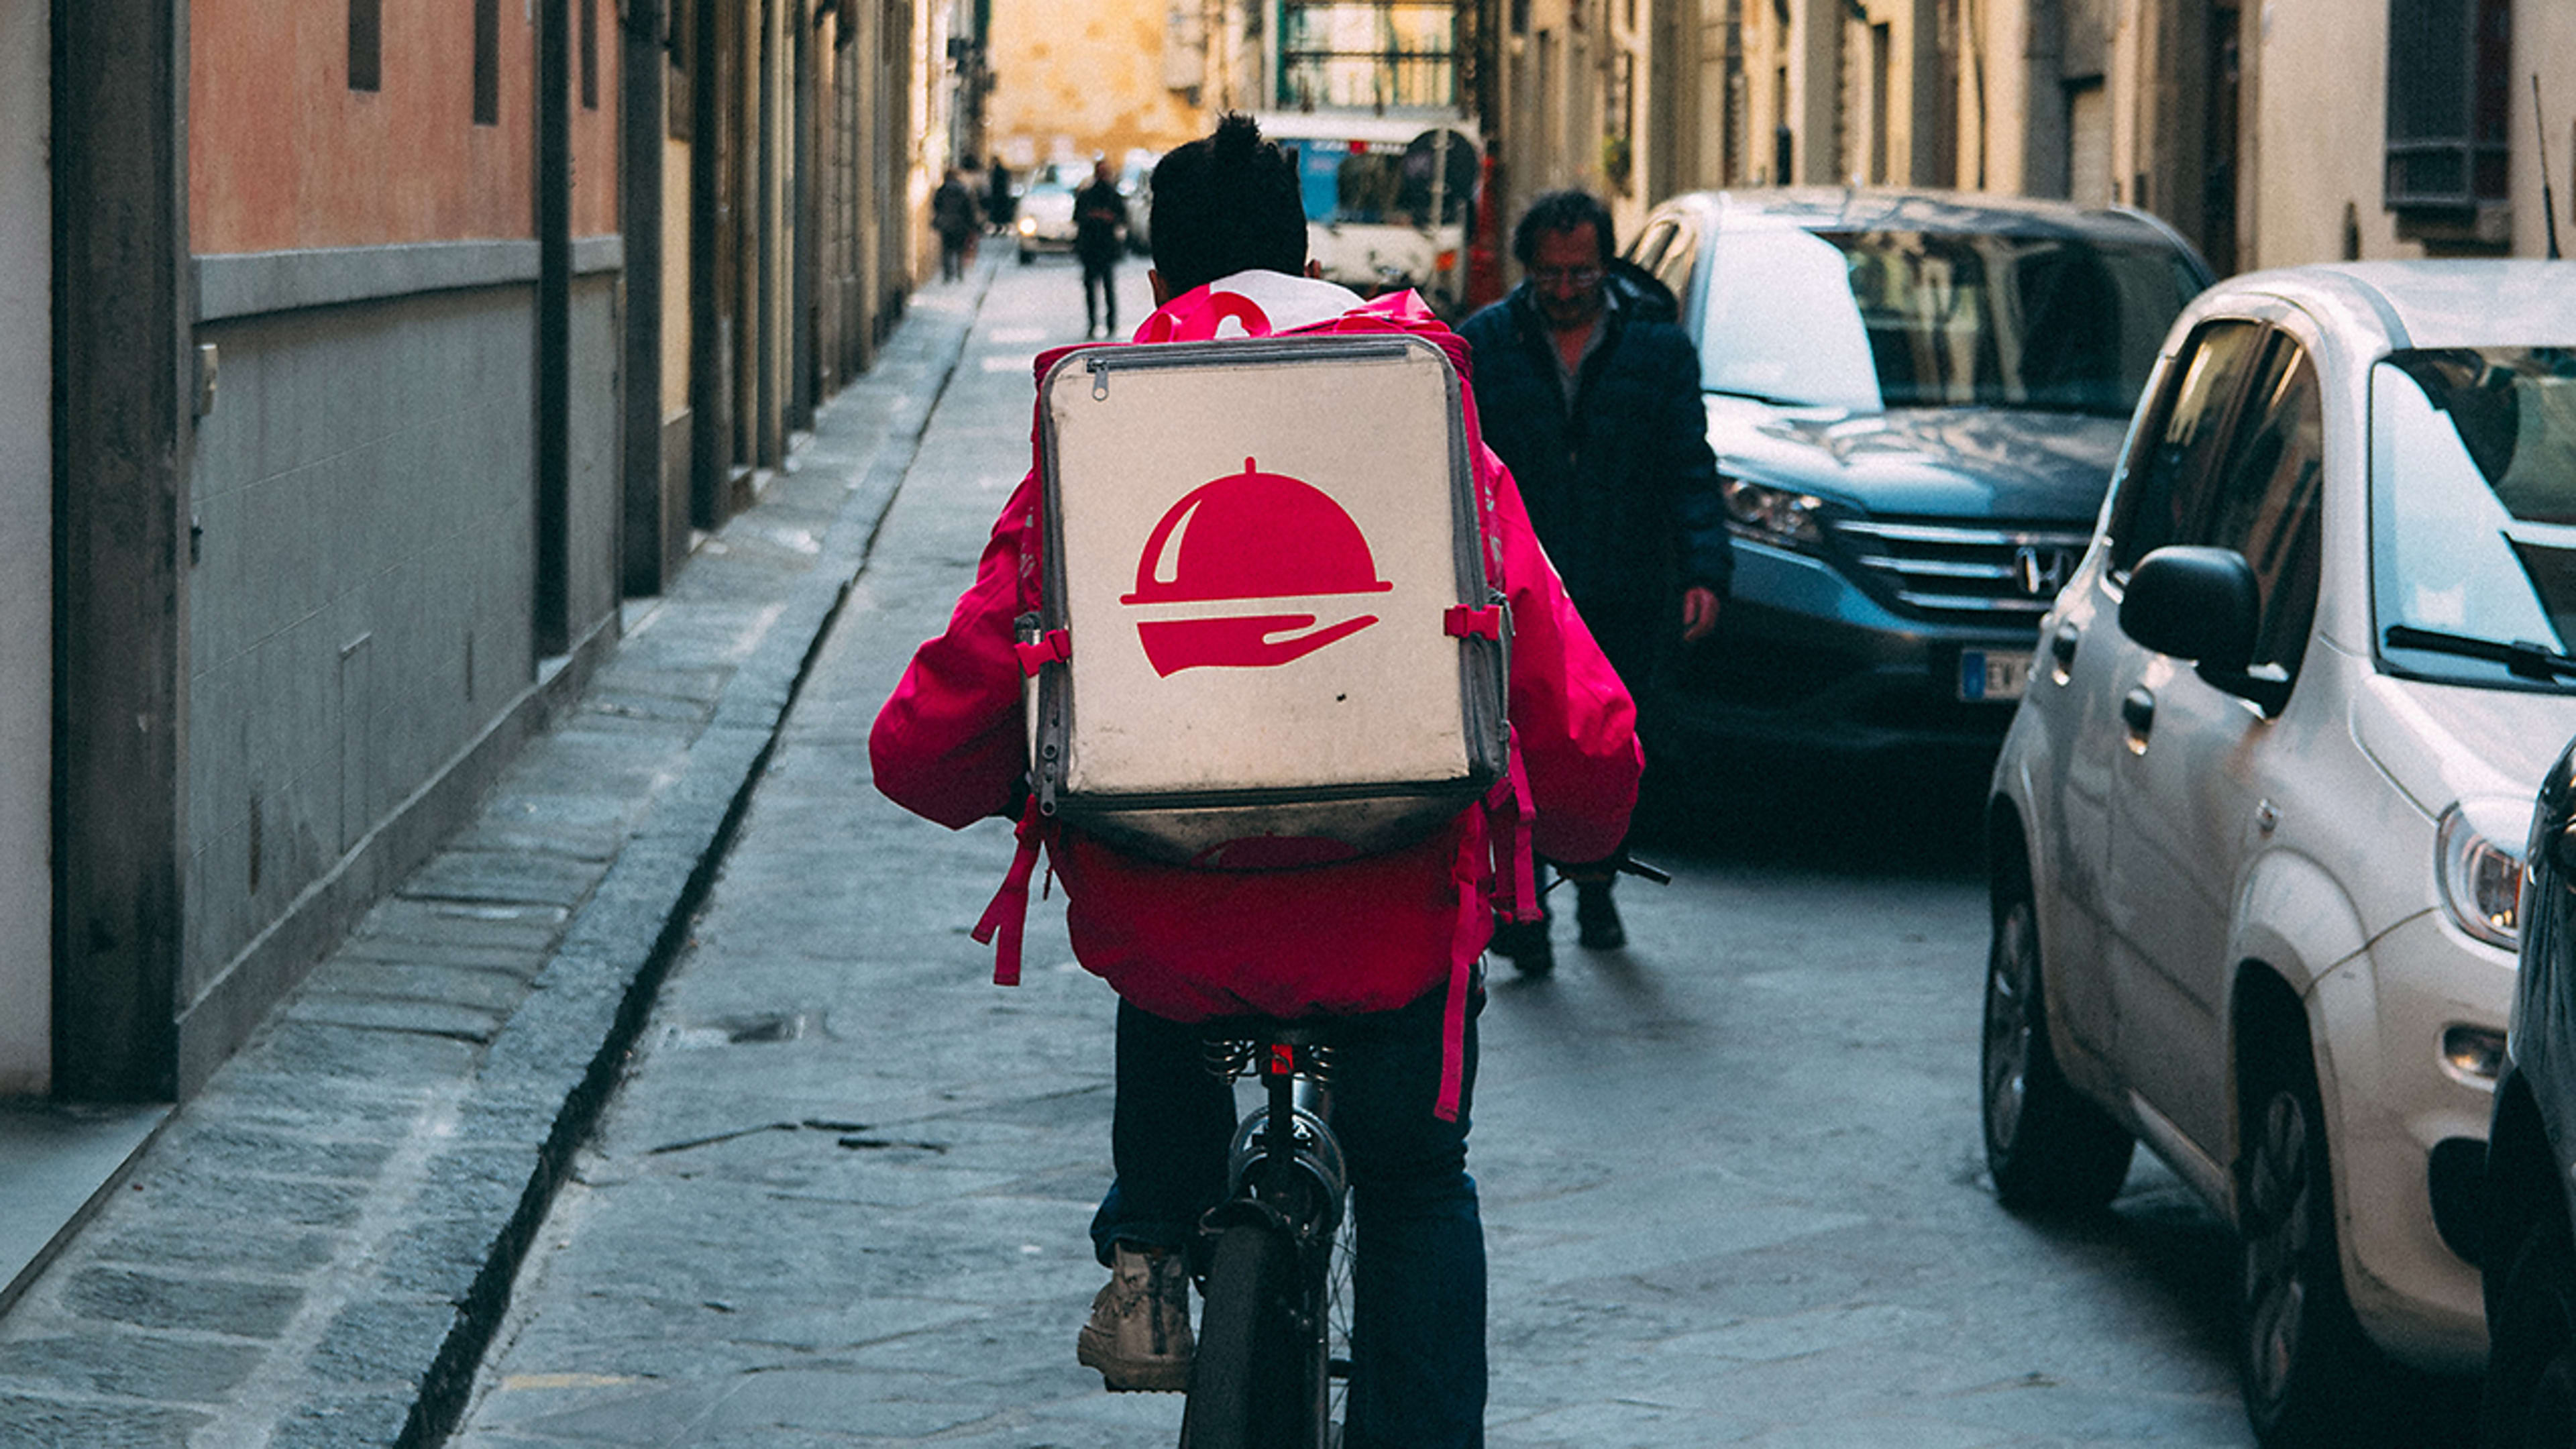 Here’s what you should tip Uber, DoorDash, and Instacart workers